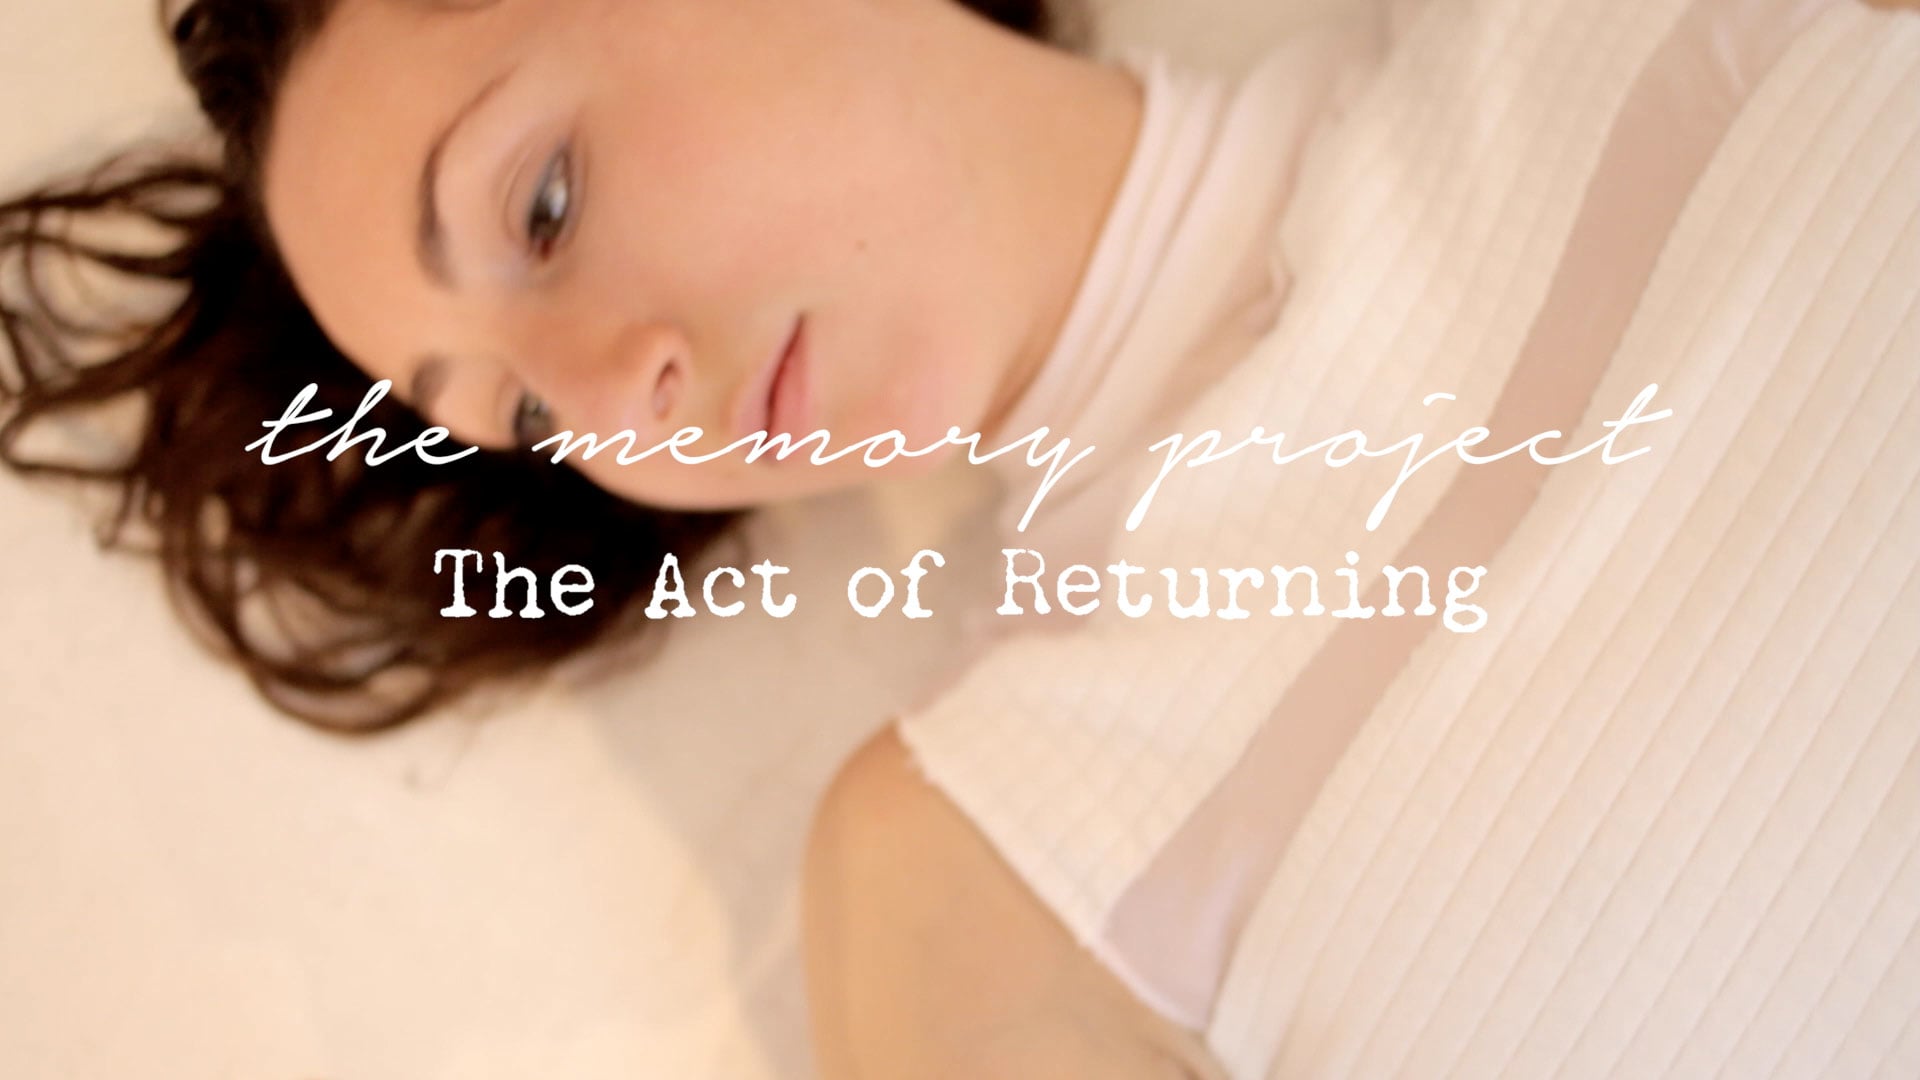 The Act of Returning